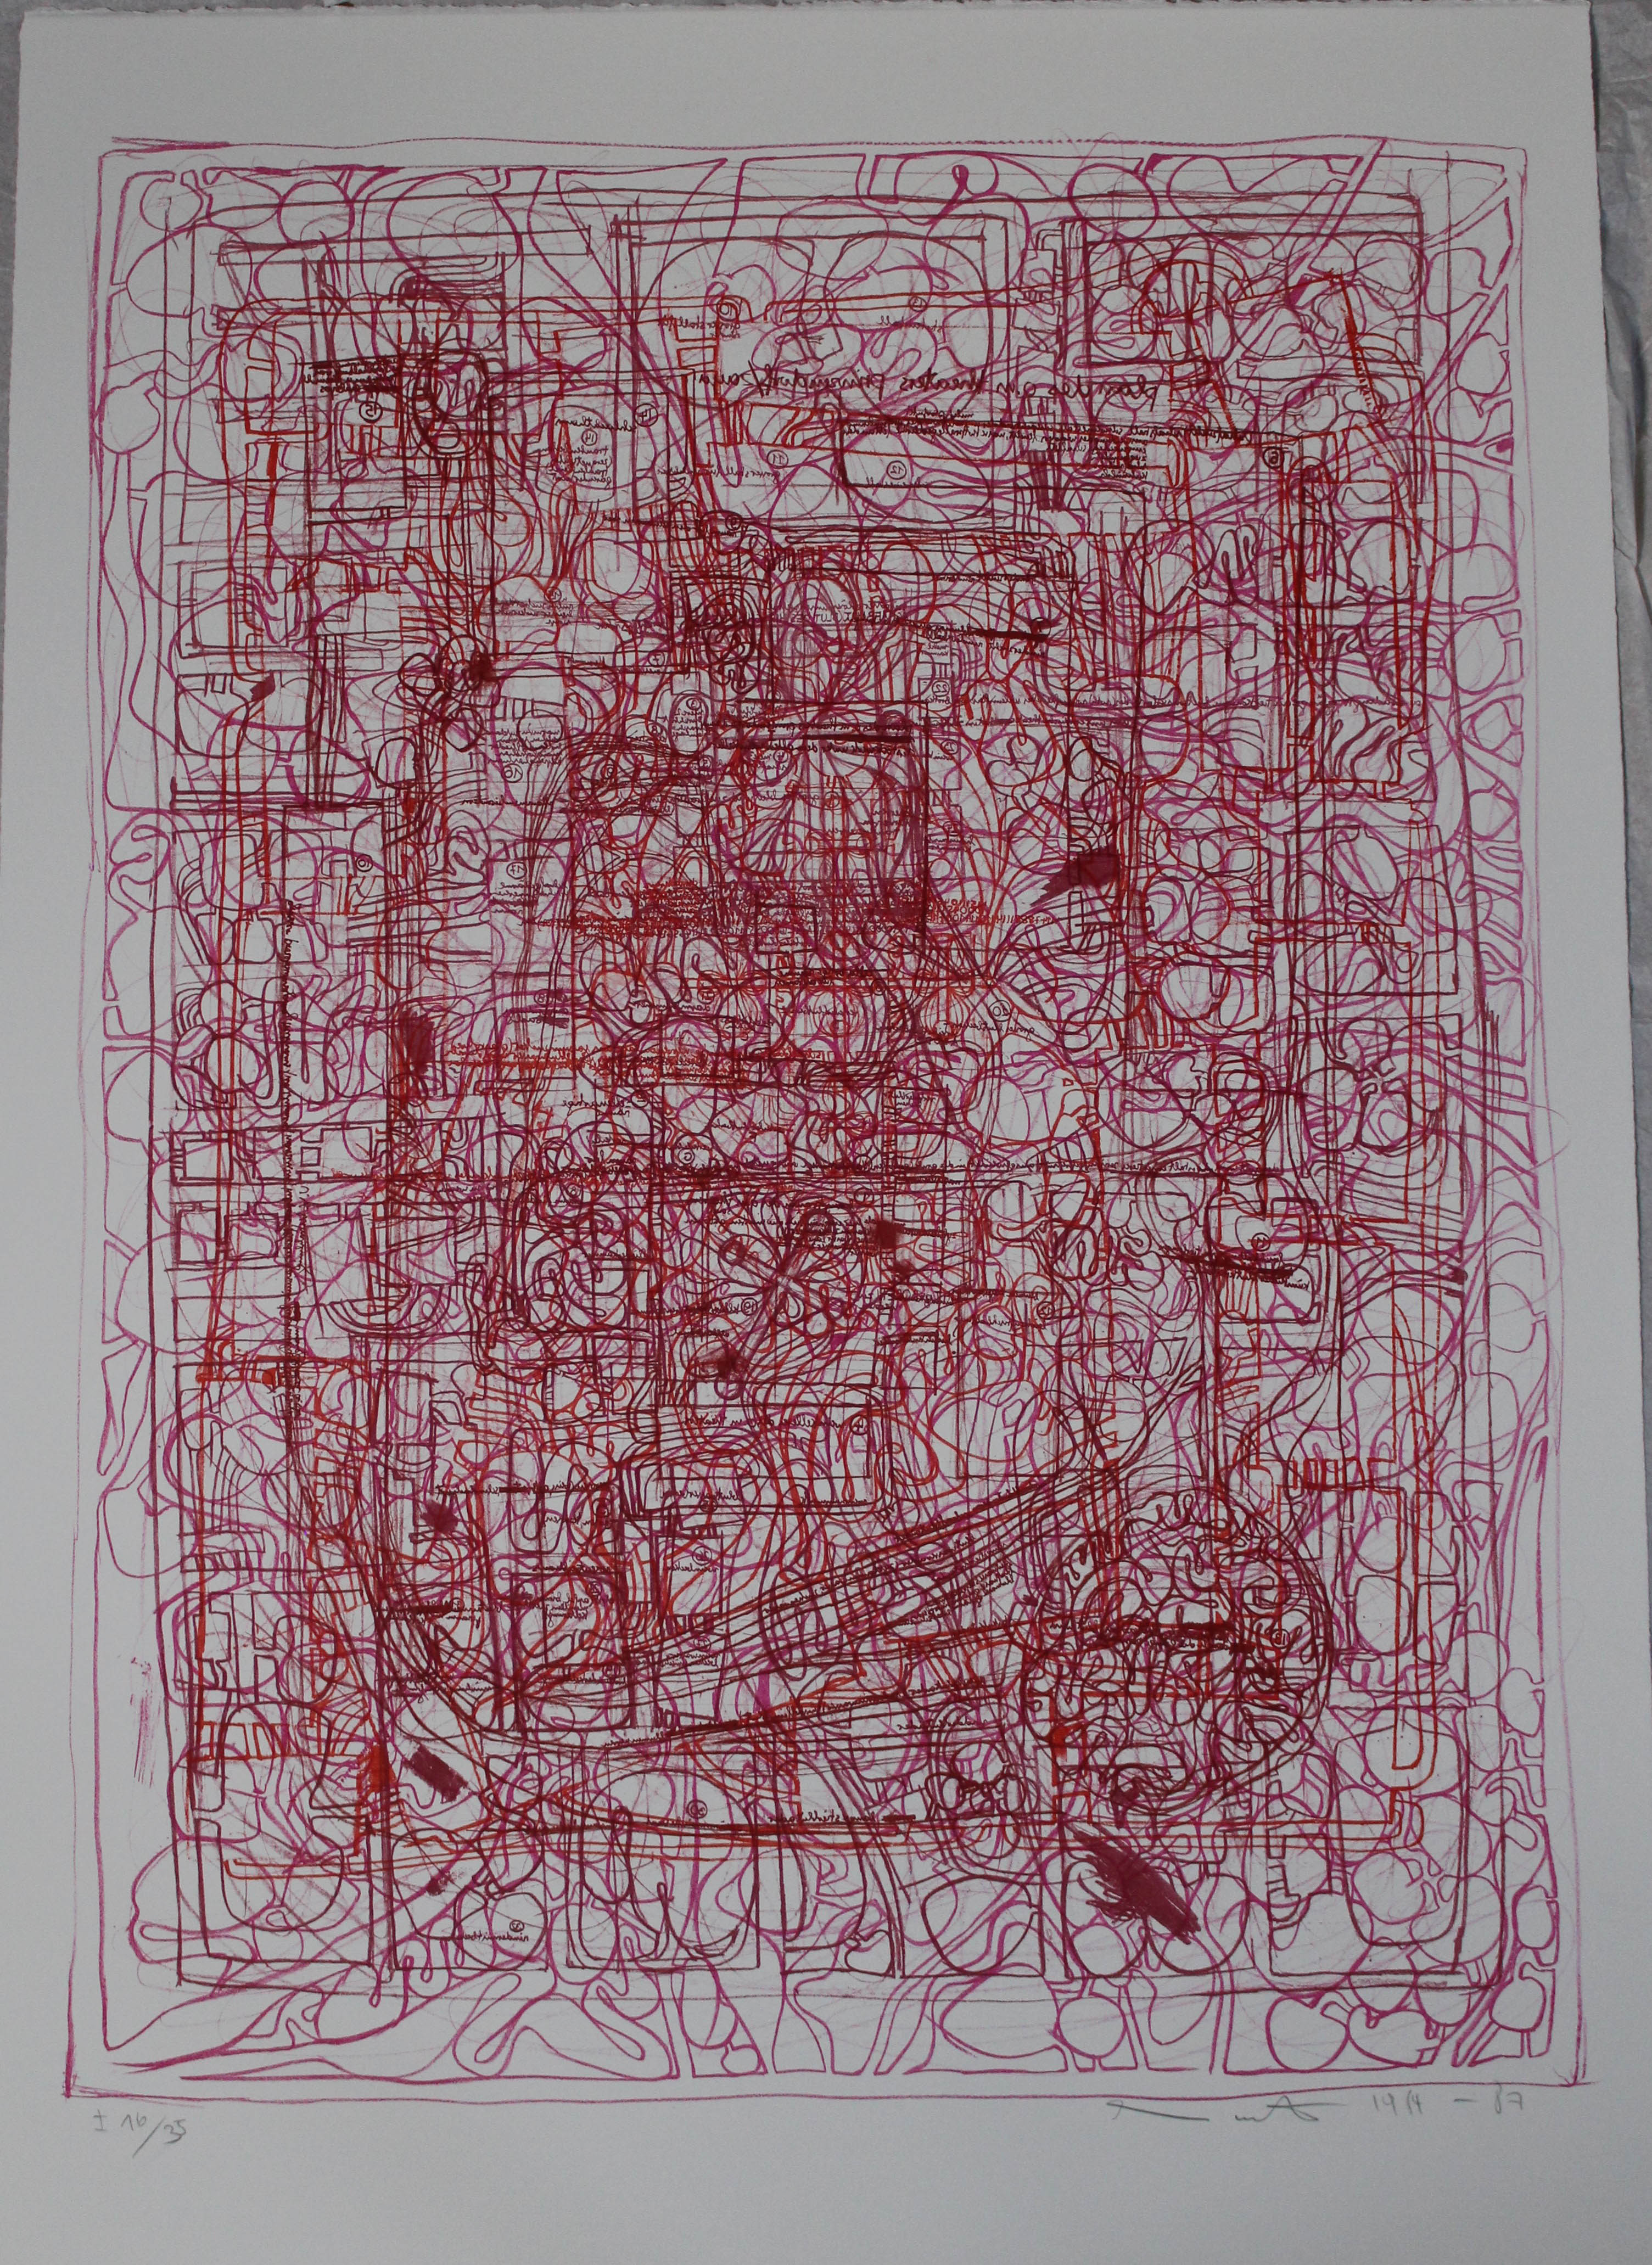 (Portfolio I n.33) Litograph in red, burgundy, carmine and violet, Corpo umano (stampa) di Hermann Nitsch - ambito viennese (XX sec)